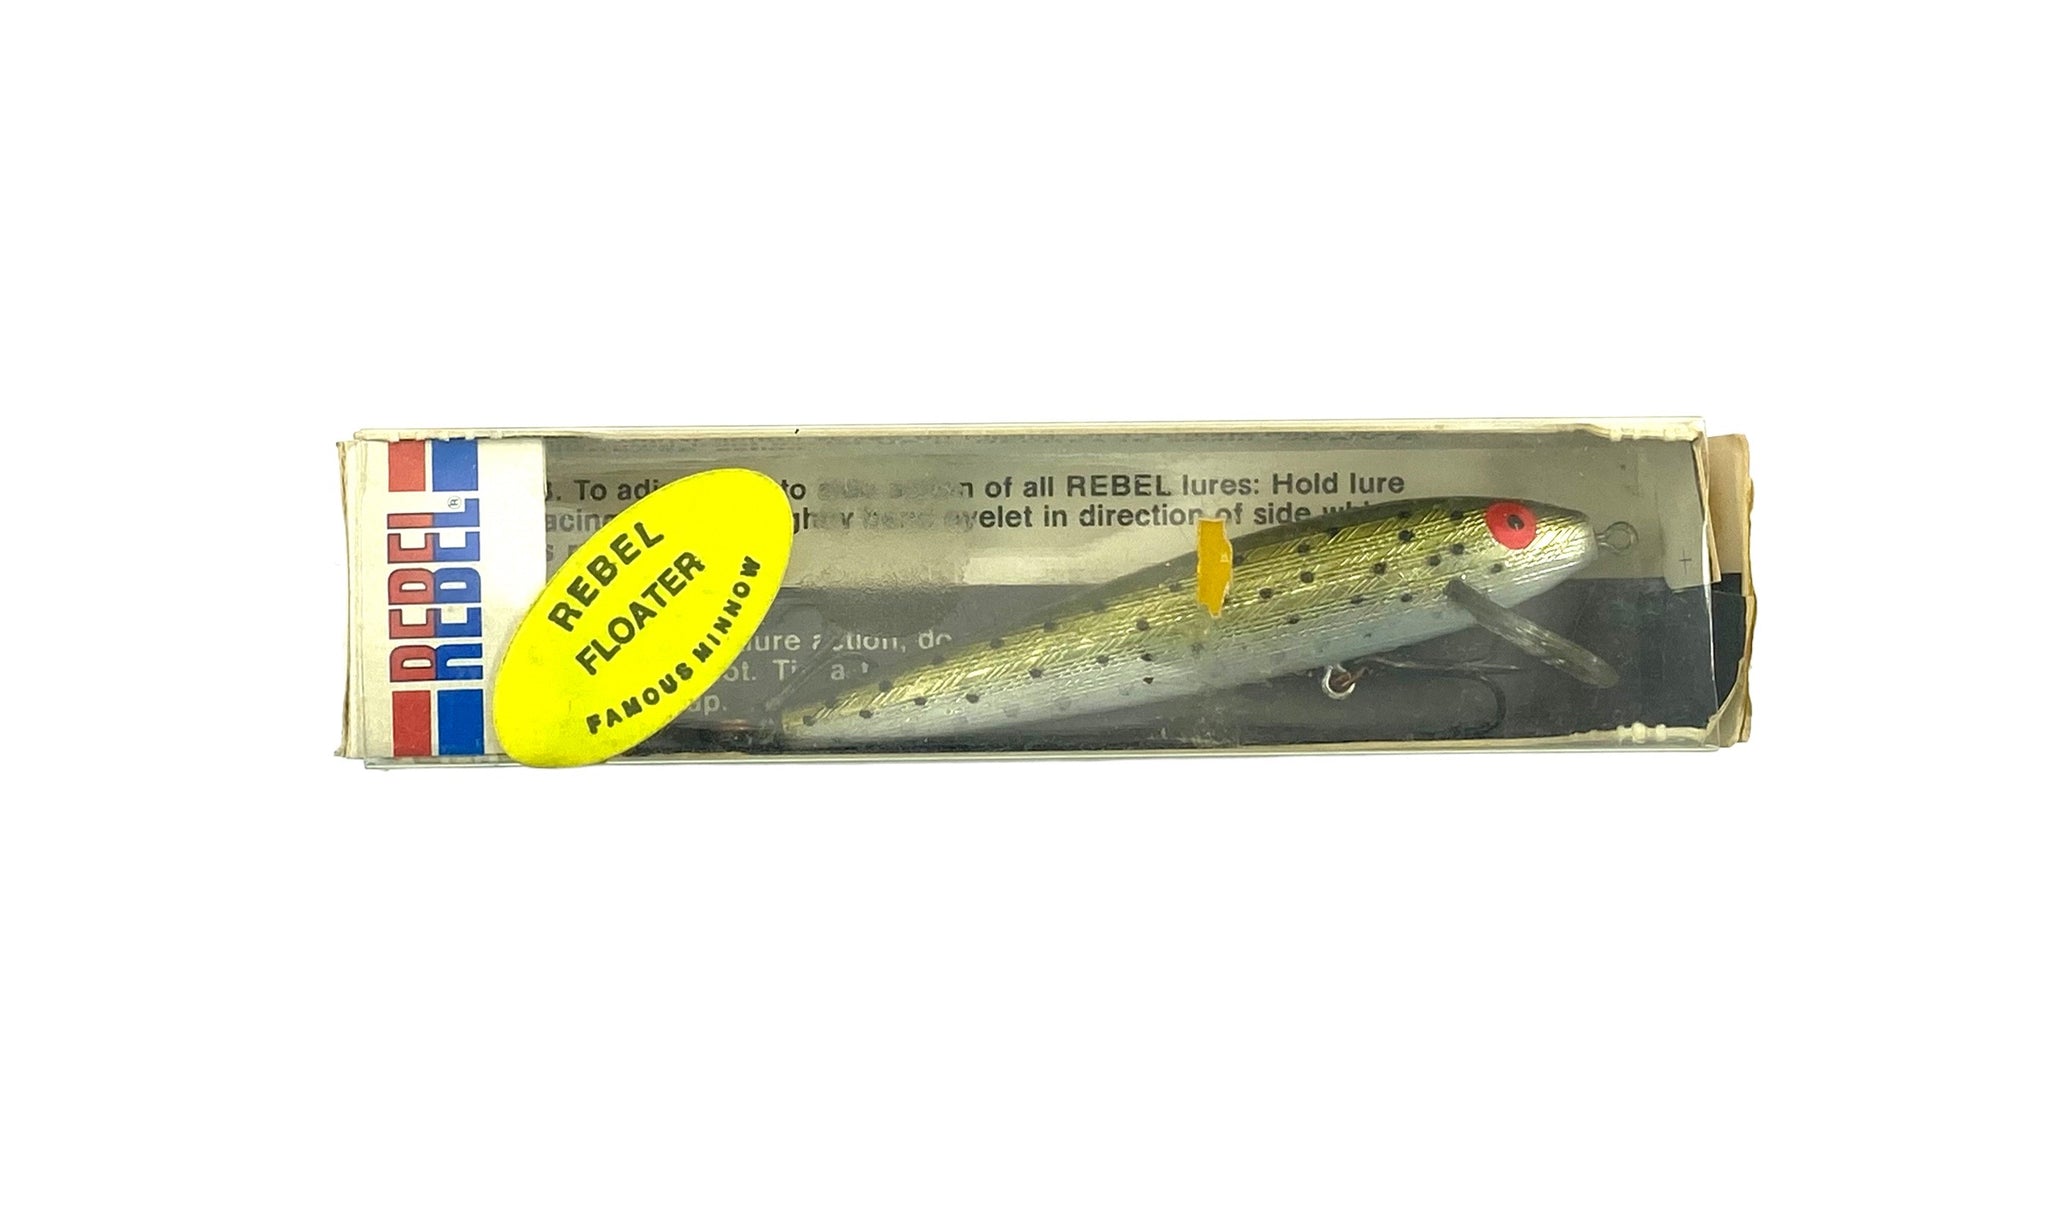 REBEL PRADCO FAMOUS MINNOW FLOATER Fishing Lure • F 1044 – Toad Tackle